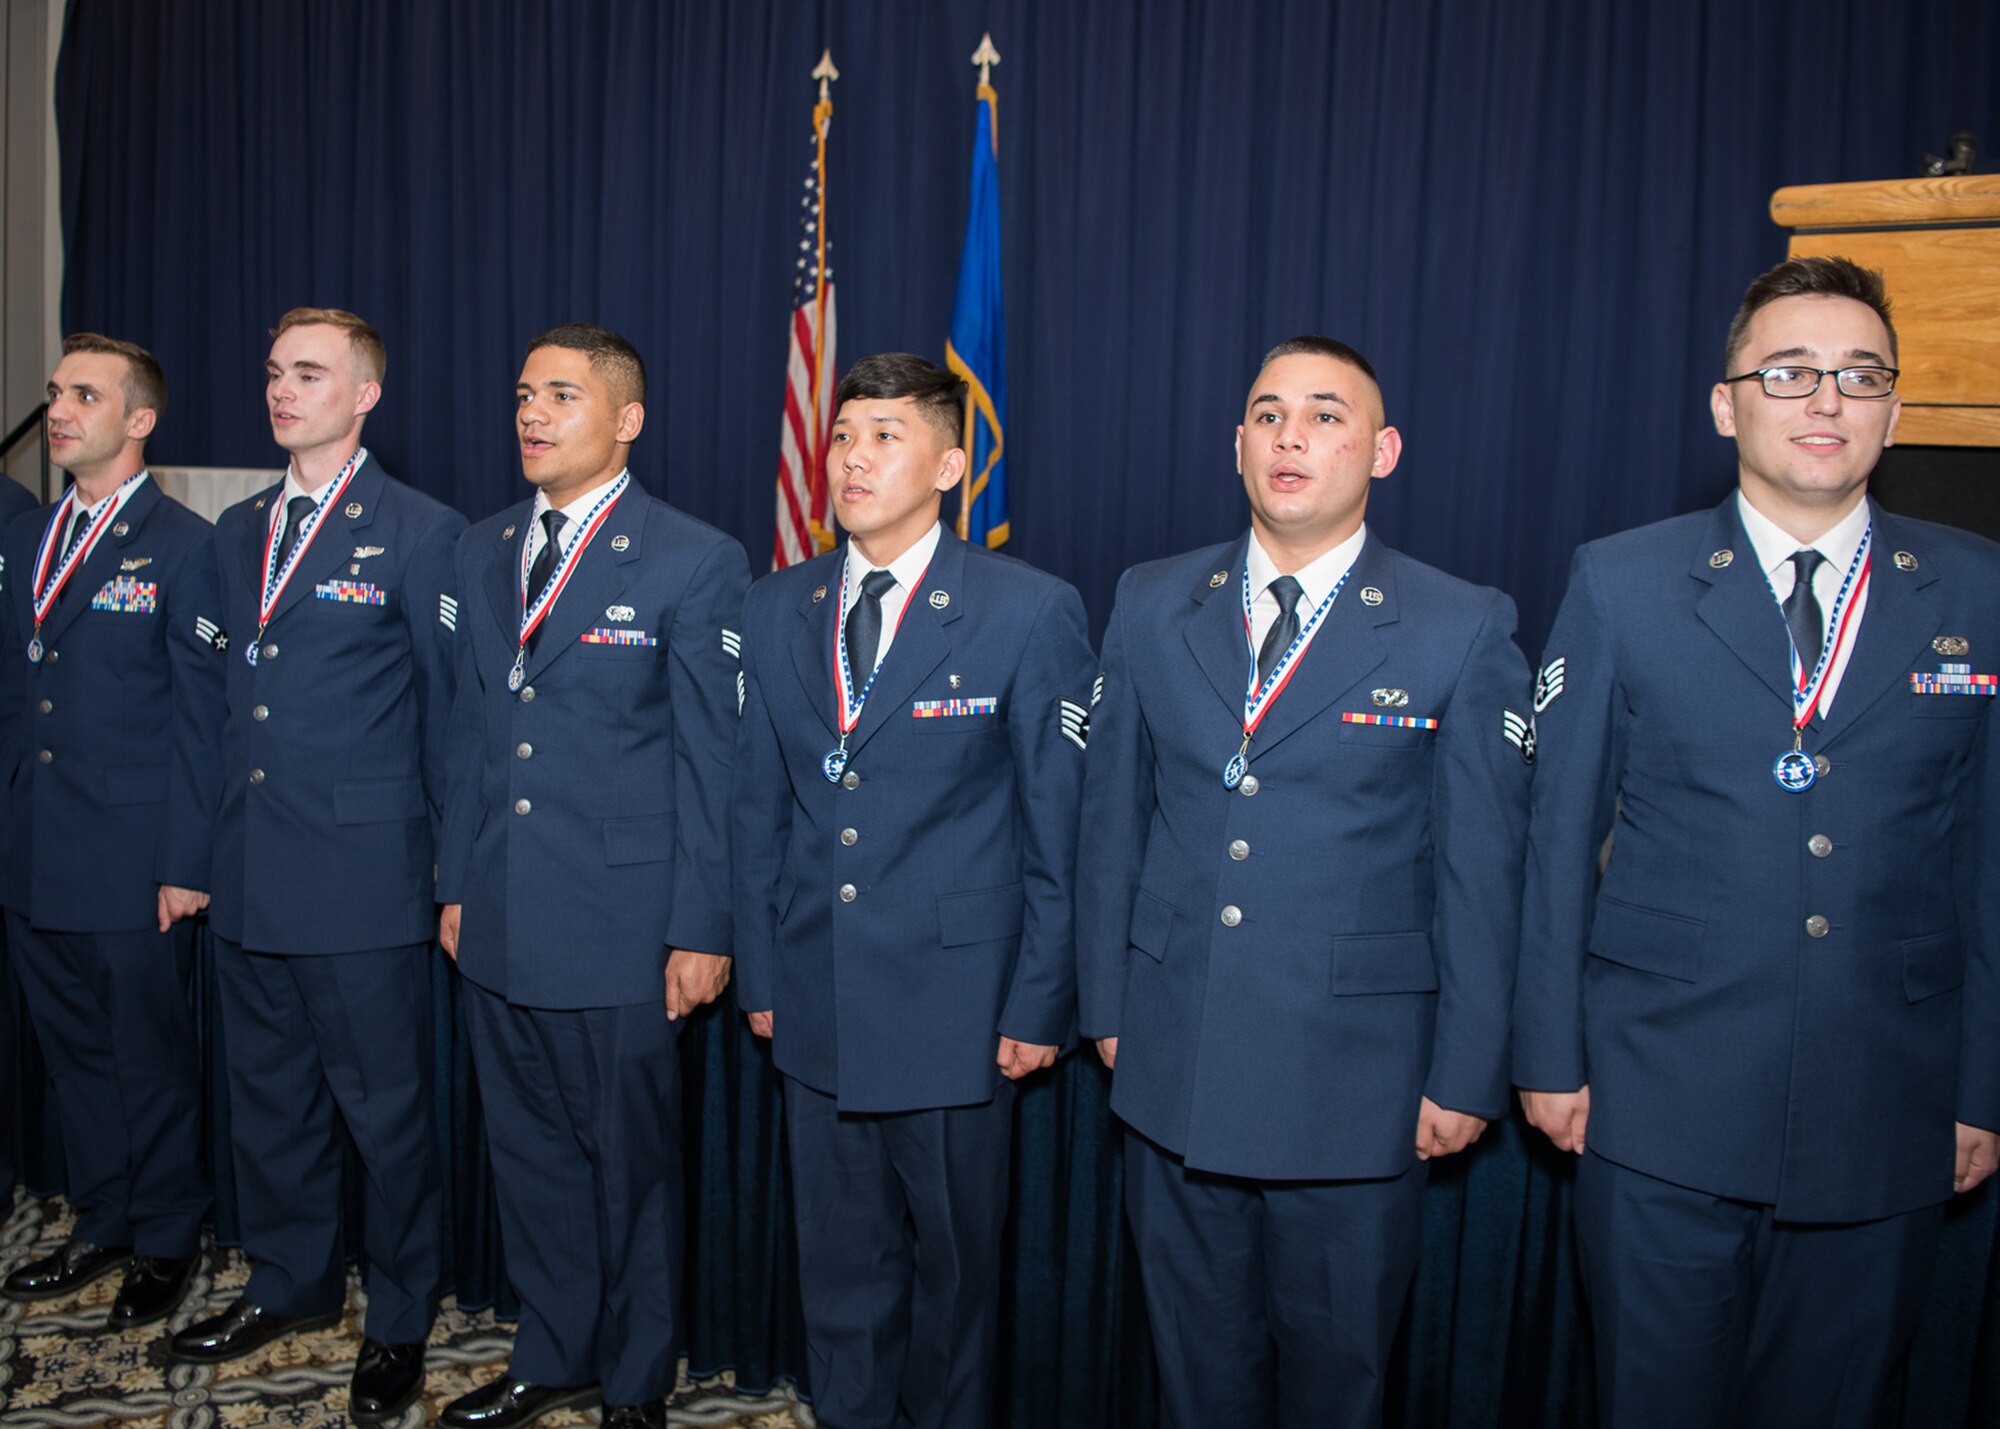 Team Dover Airmen sing the Air Force song, “Wild Blue Yonder,” at the conclusion of an Airman Leadership School graduation ceremony May 2, 2019, at Dover Air Force Base, Del. The school is a requirement for promotion into the noncommissioned officer ranks. (Official U.S. Air Force photo by Mauricio Campino)